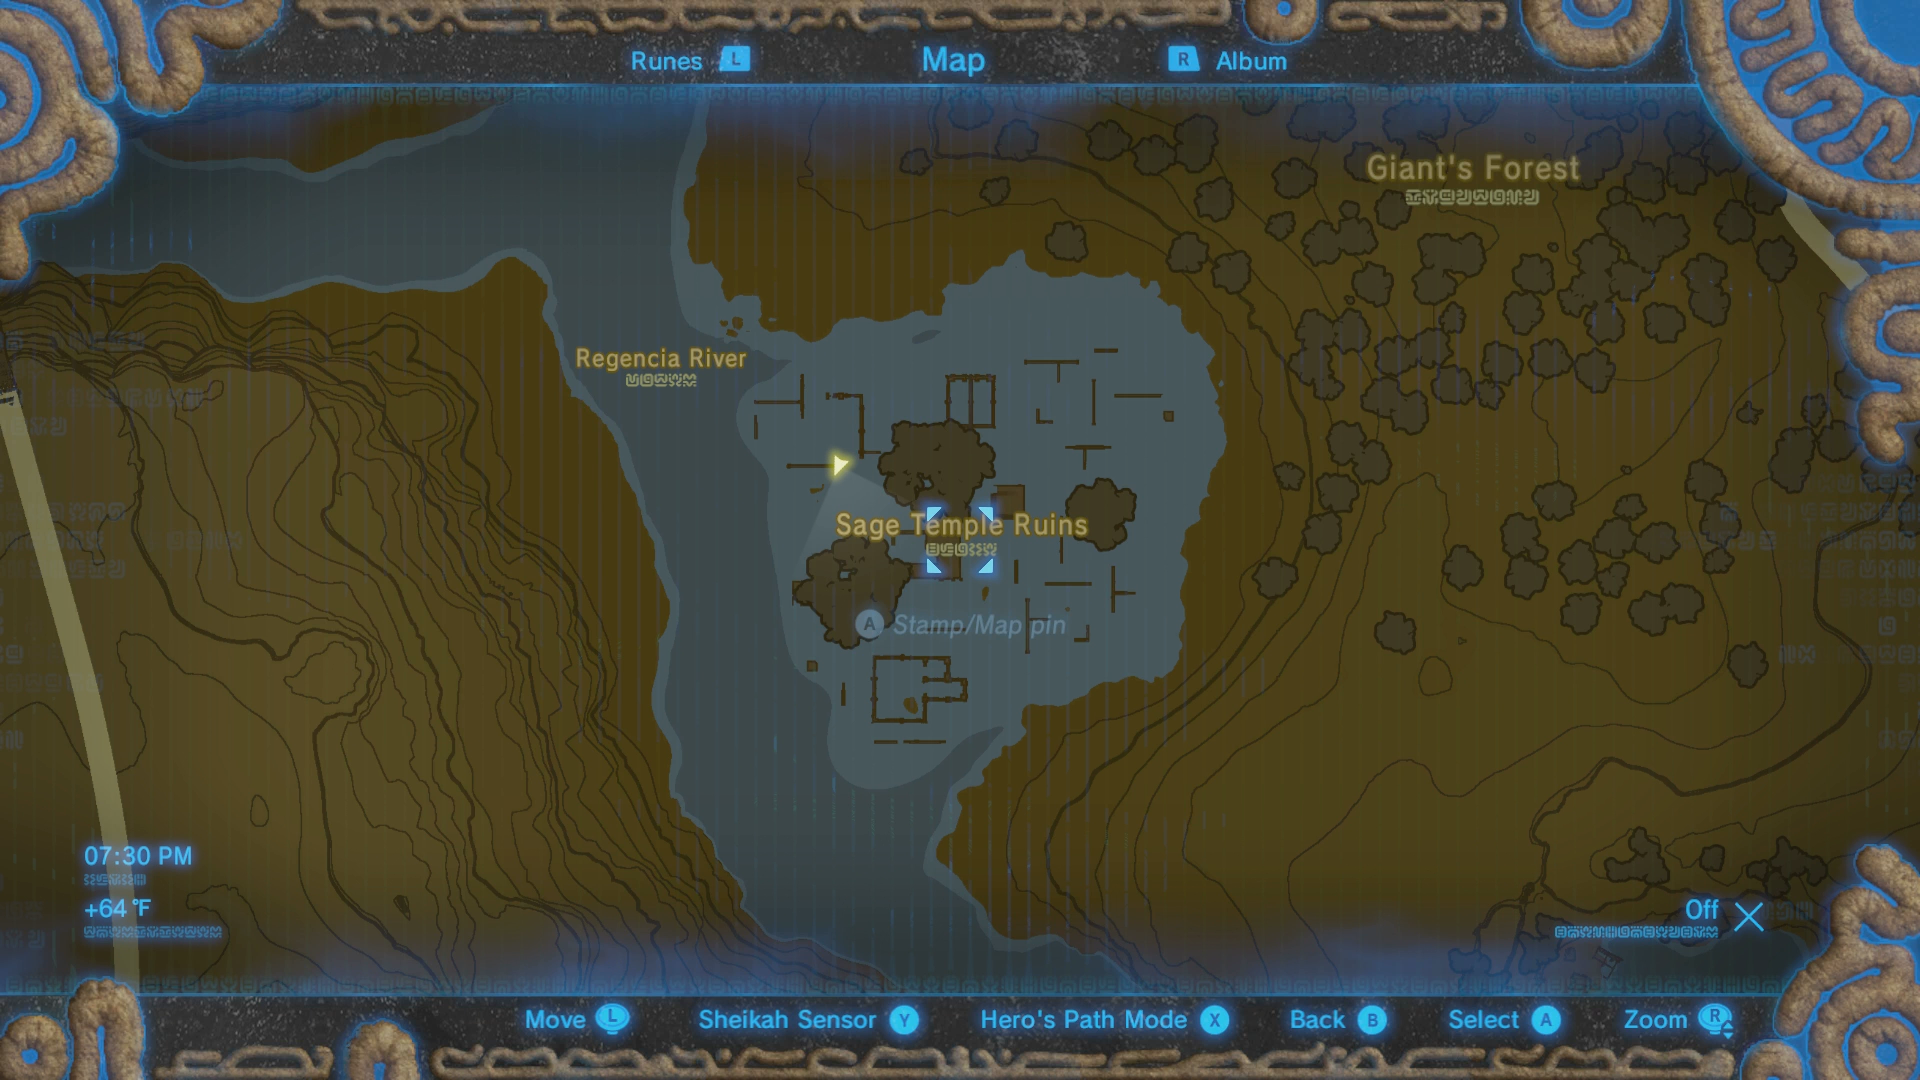 How To Find Zelda: Breath Of The Wild’s New DLC Items